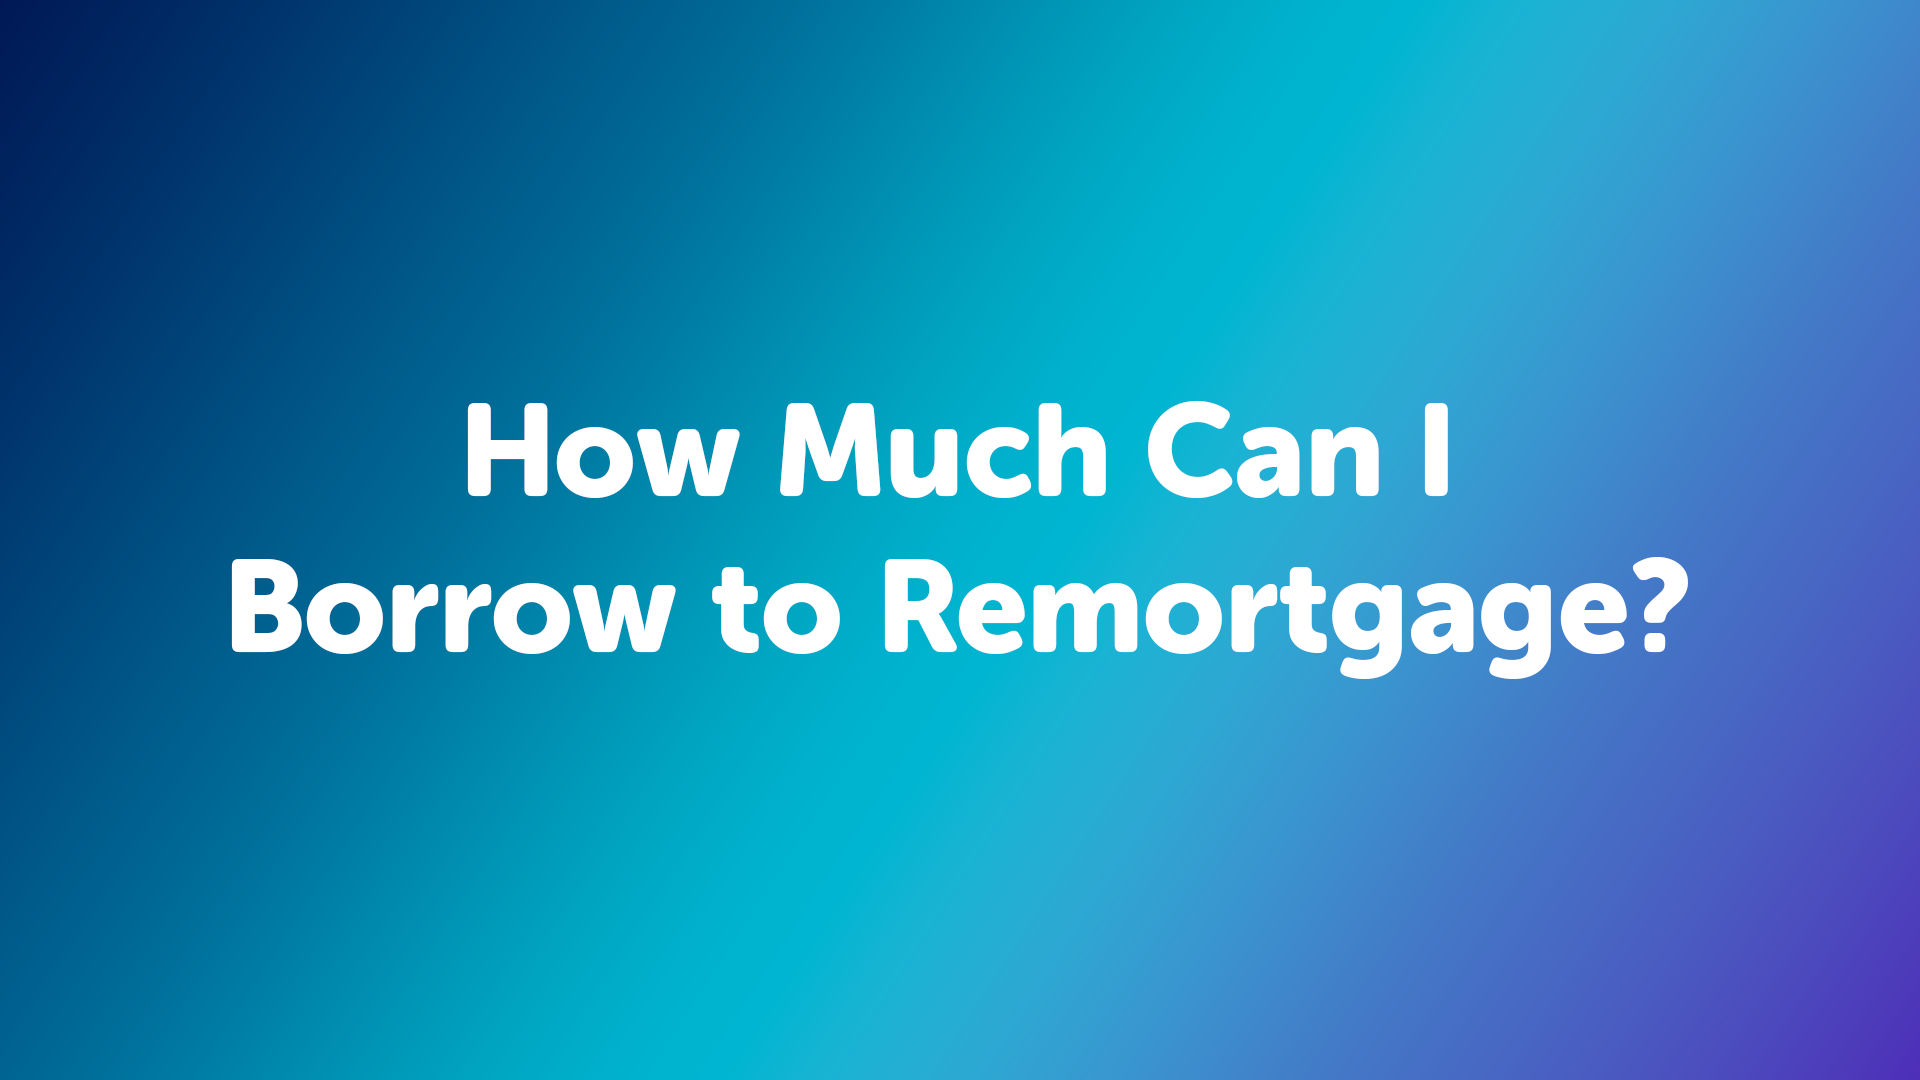 How Much Can I Borrow to Remortgage?